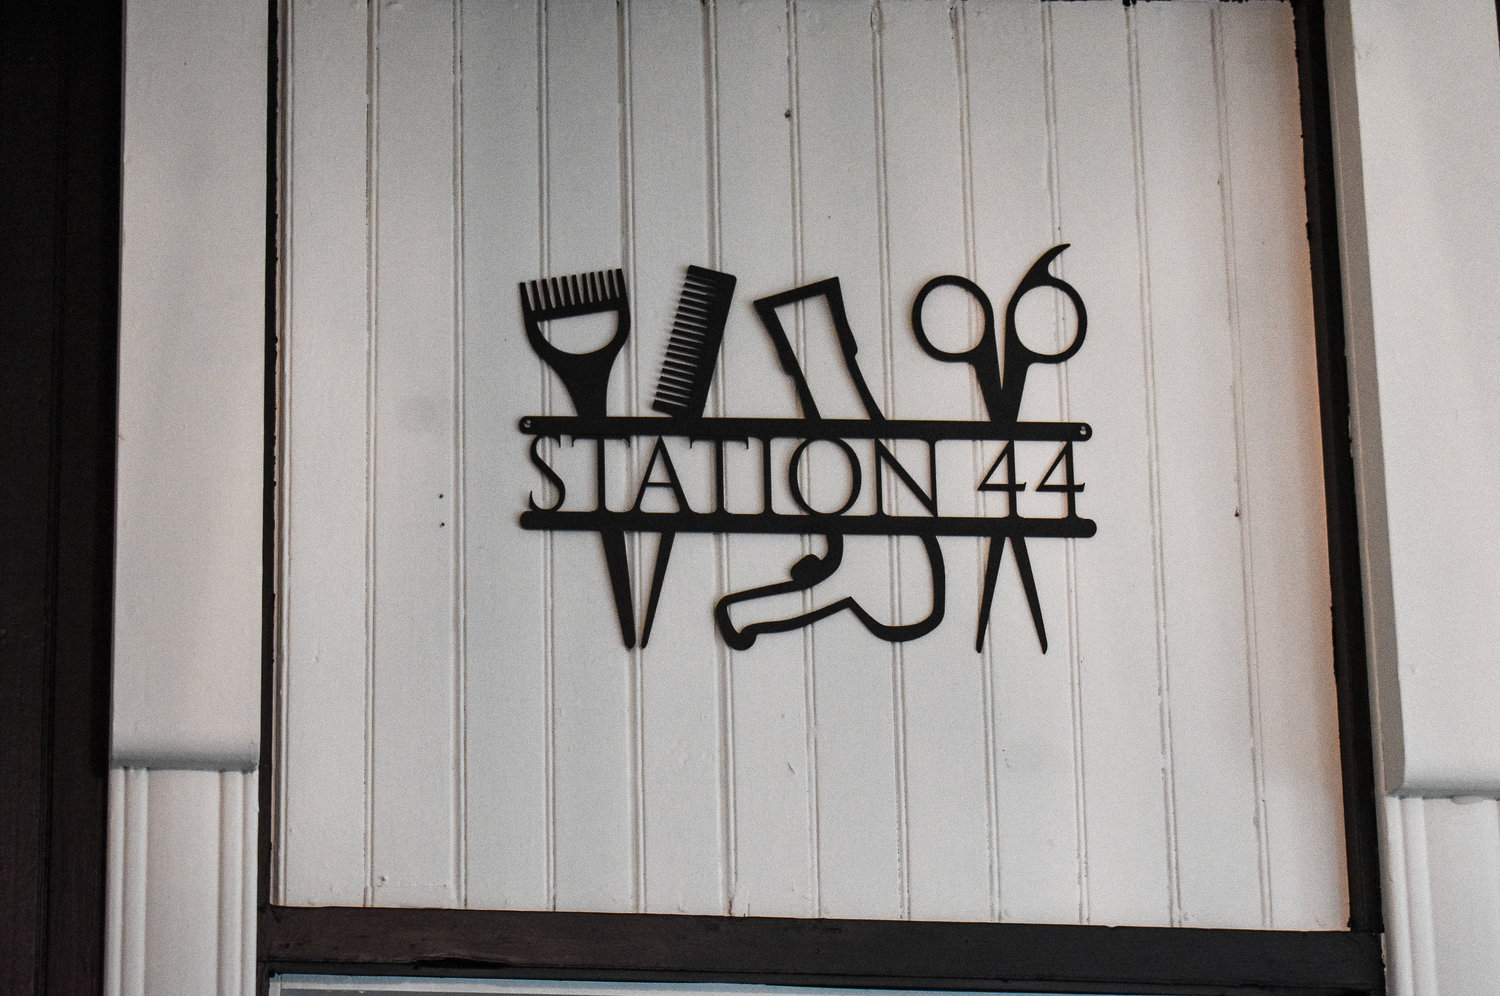 Station 44 Salon is one of three current tenants at RW3 Depot in Hamilton. Two more tenants are planned to soon arrive.